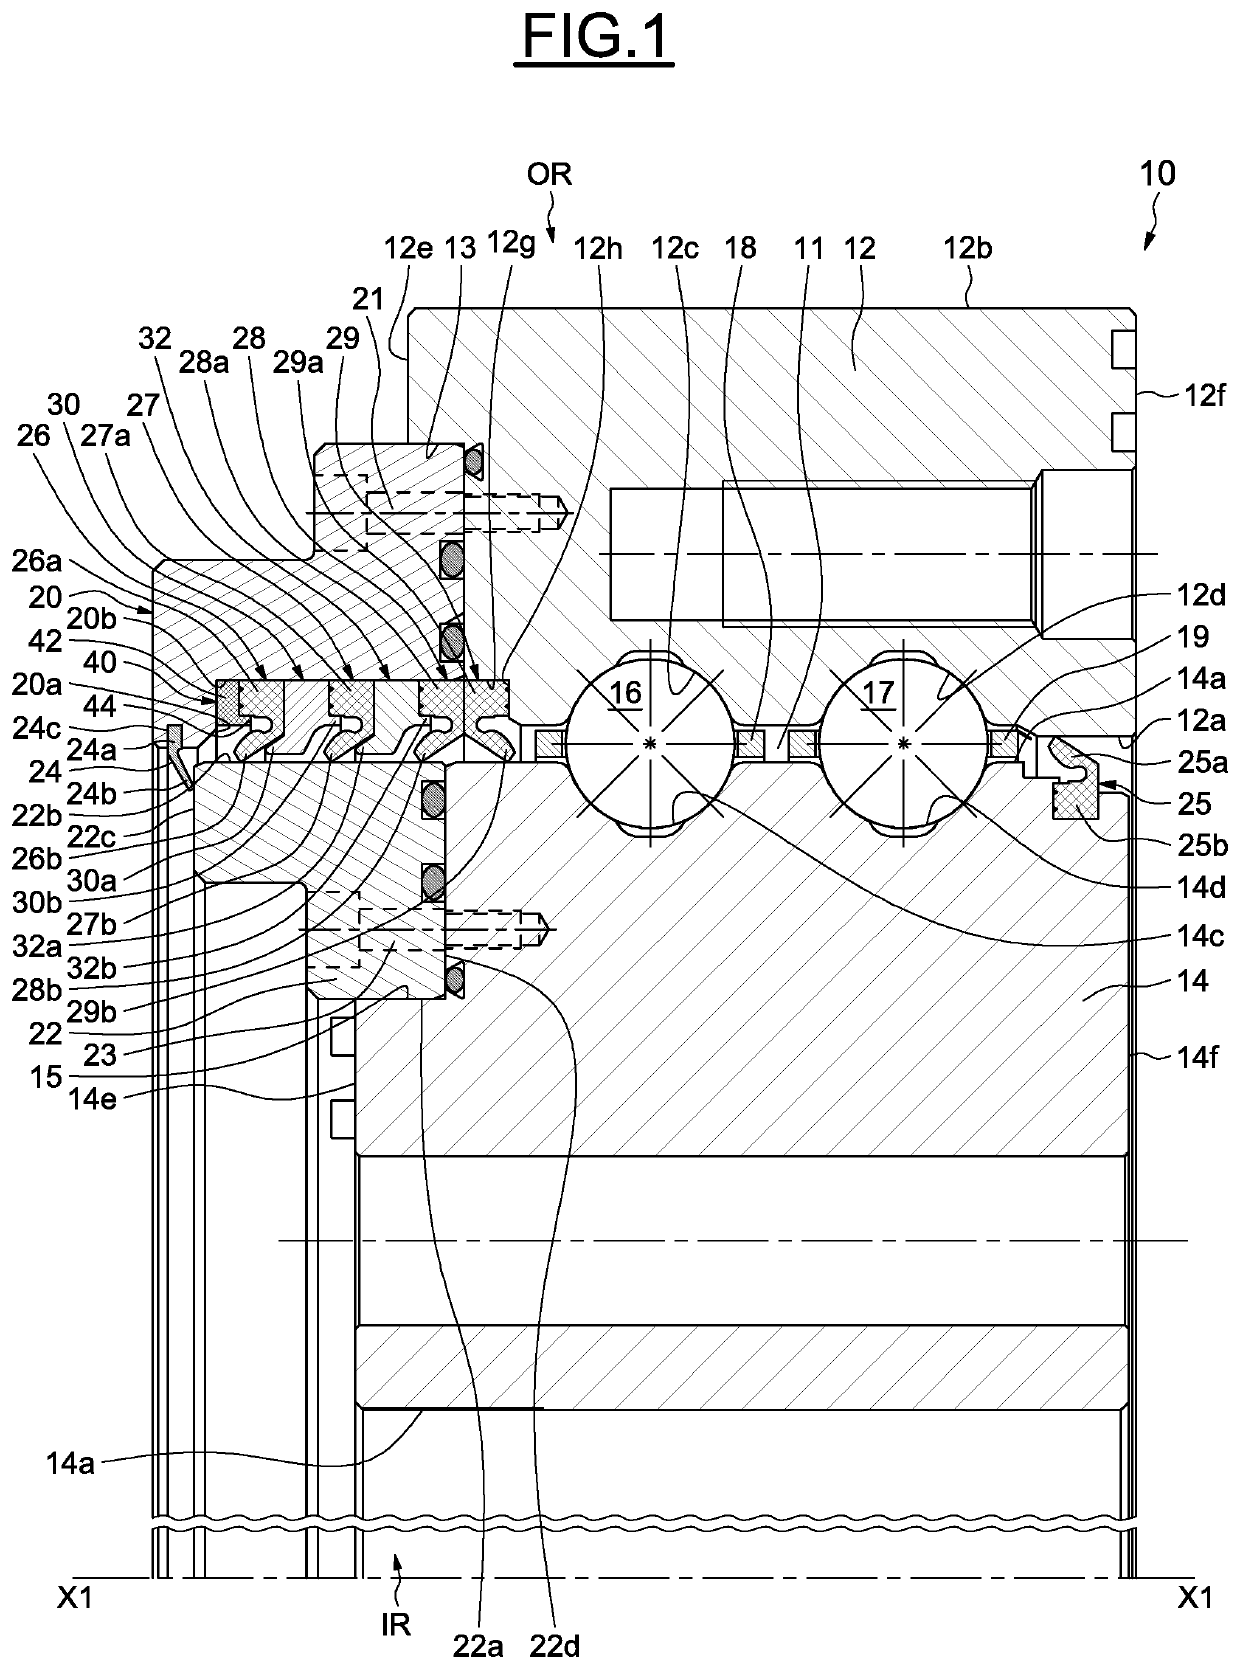 Bearing with at least one sealing element and at least one adjusting shim for axially displacing said sealing element